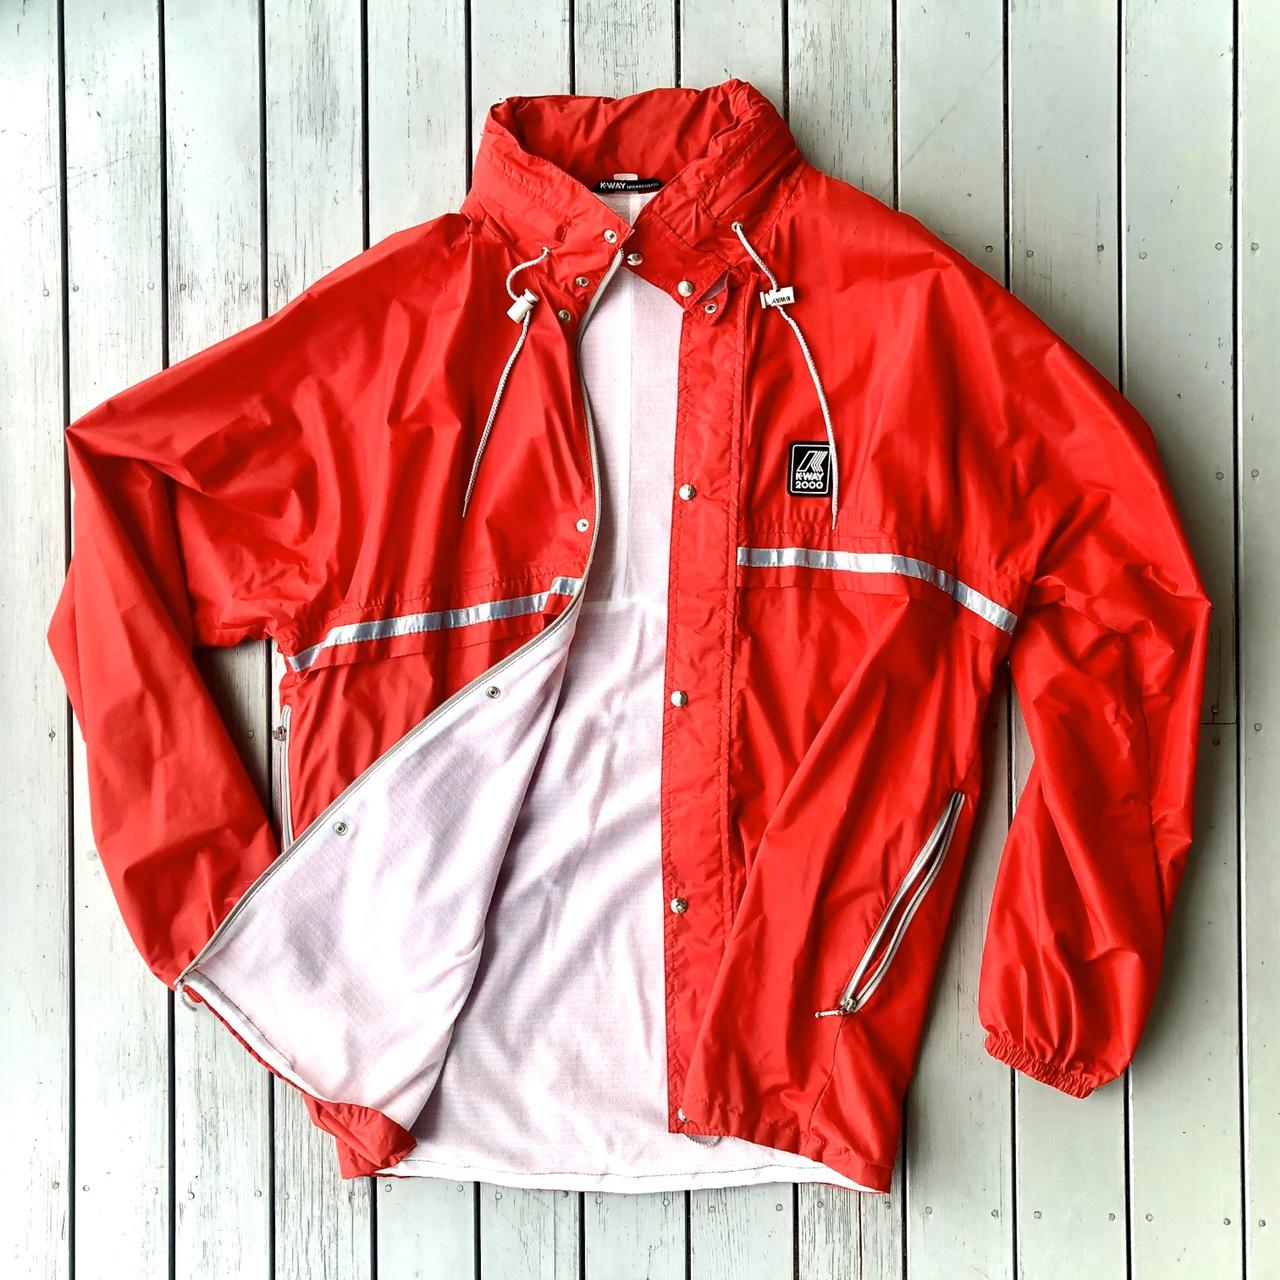 K-Way Men's Red and White Jacket